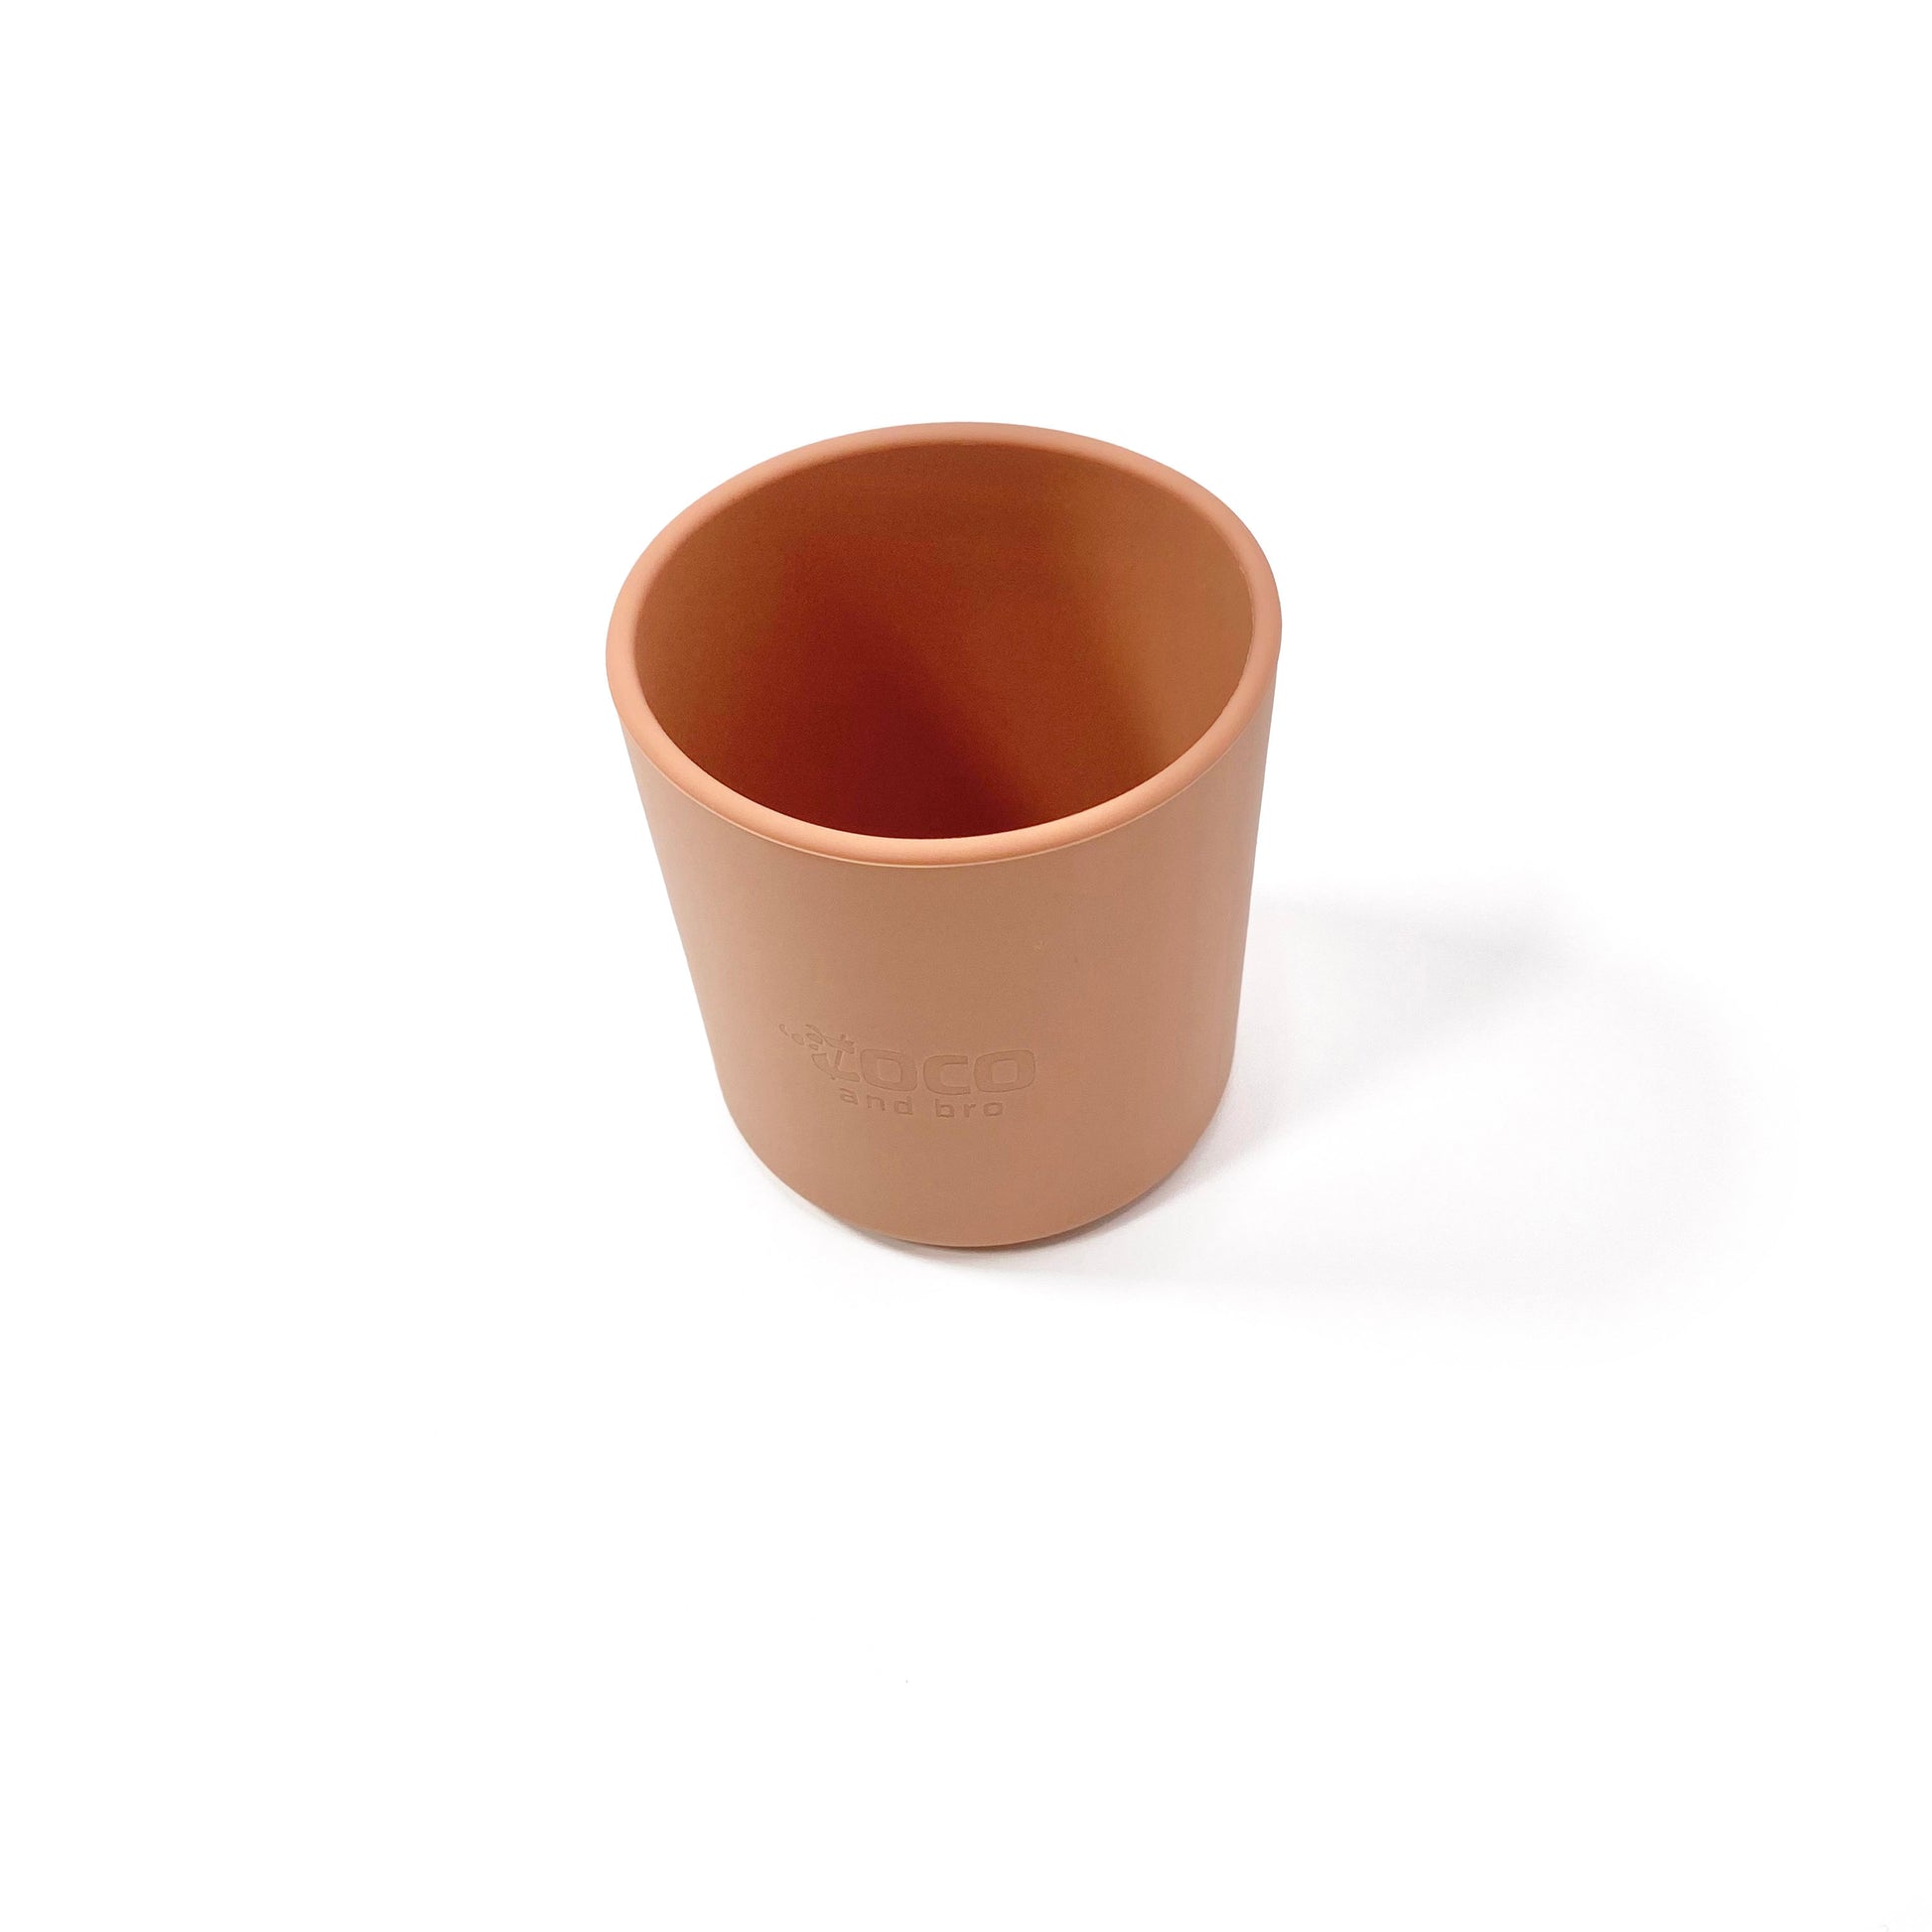 A sunset orange silicone children’s drinking cup. View from above.